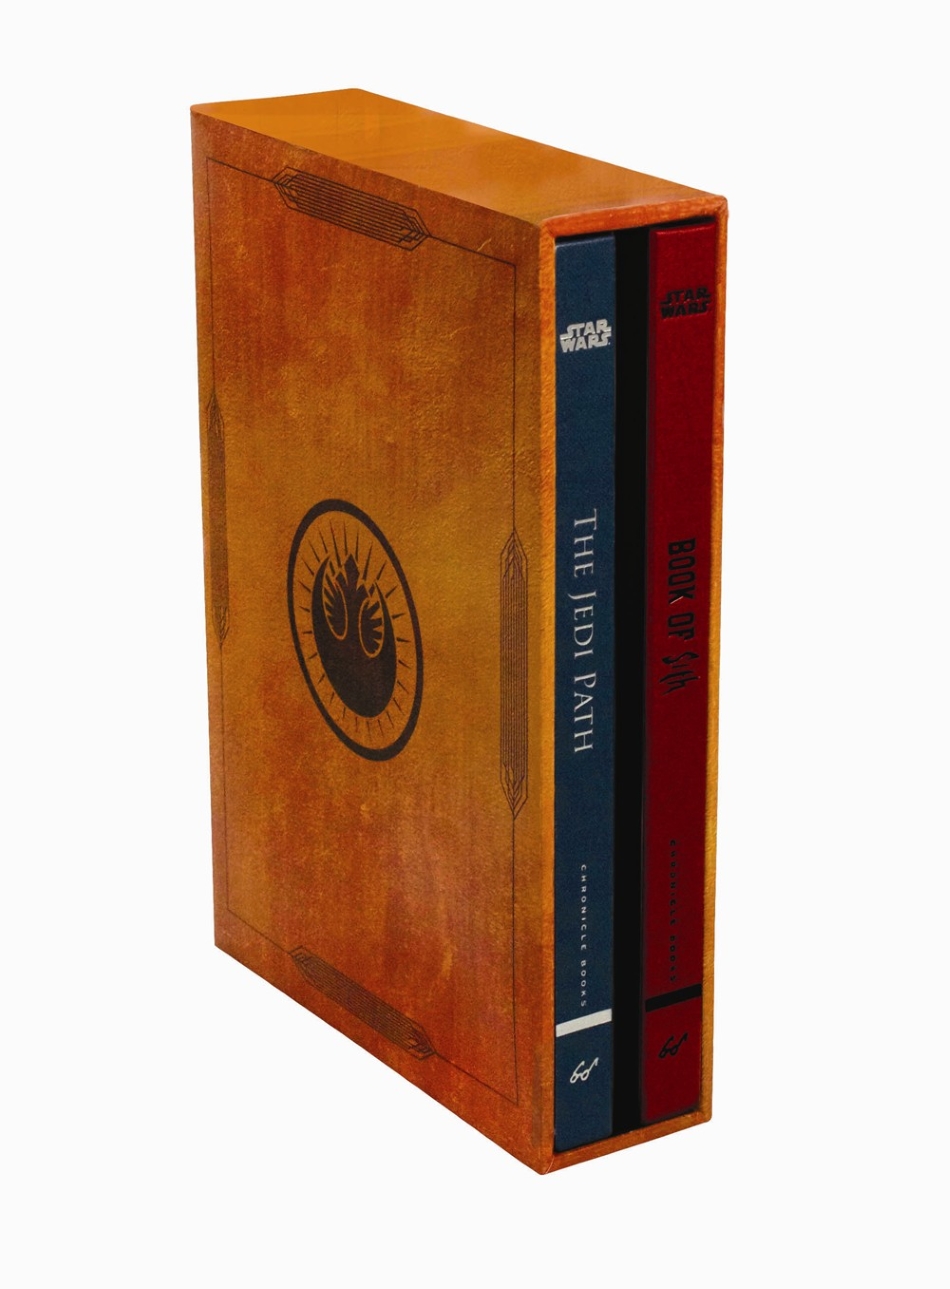 Star Wars: The Jedi Path and Book of Sith Deluxe Box Set (12.08.2014)